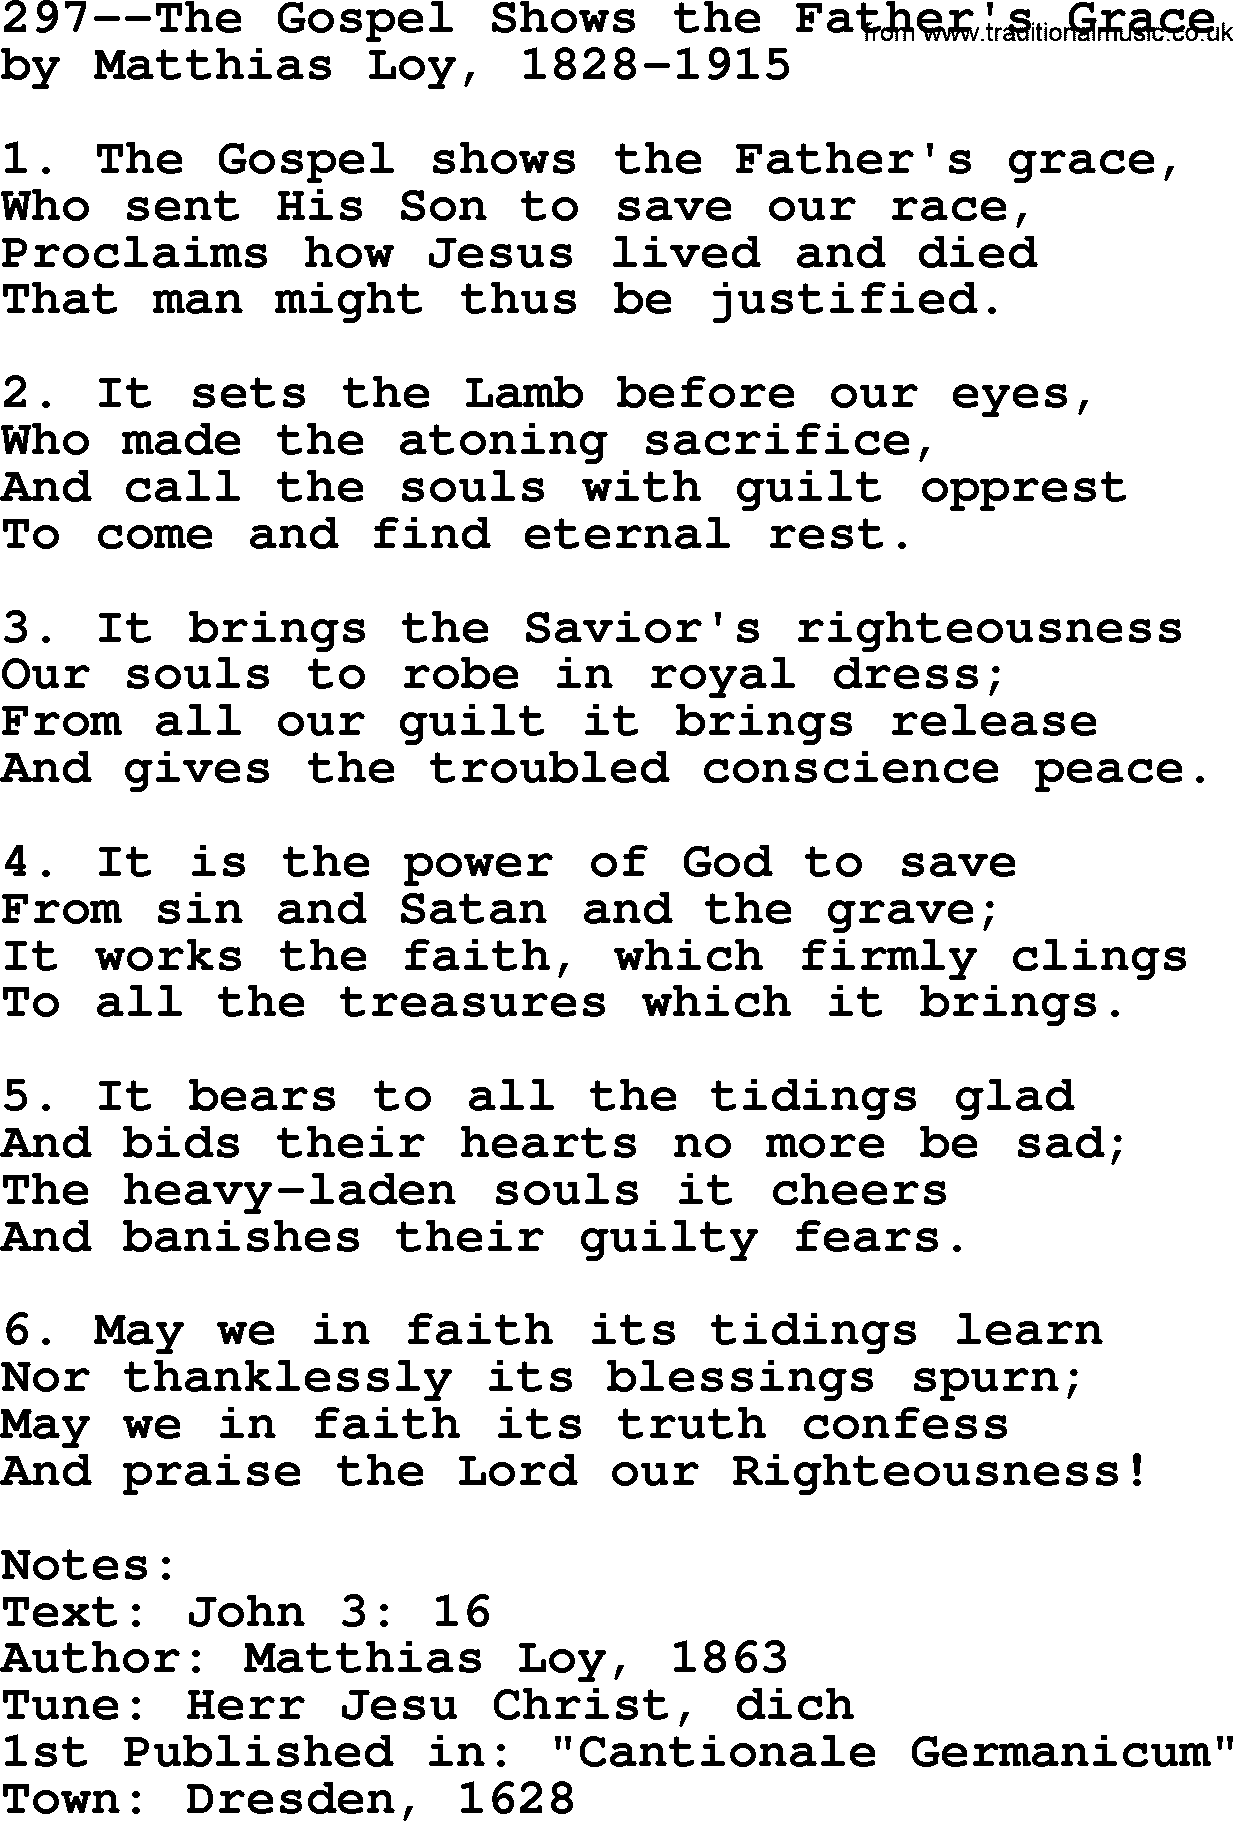 Lutheran Hymn: 297--The Gospel Shows the Father's Grace.txt lyrics with PDF